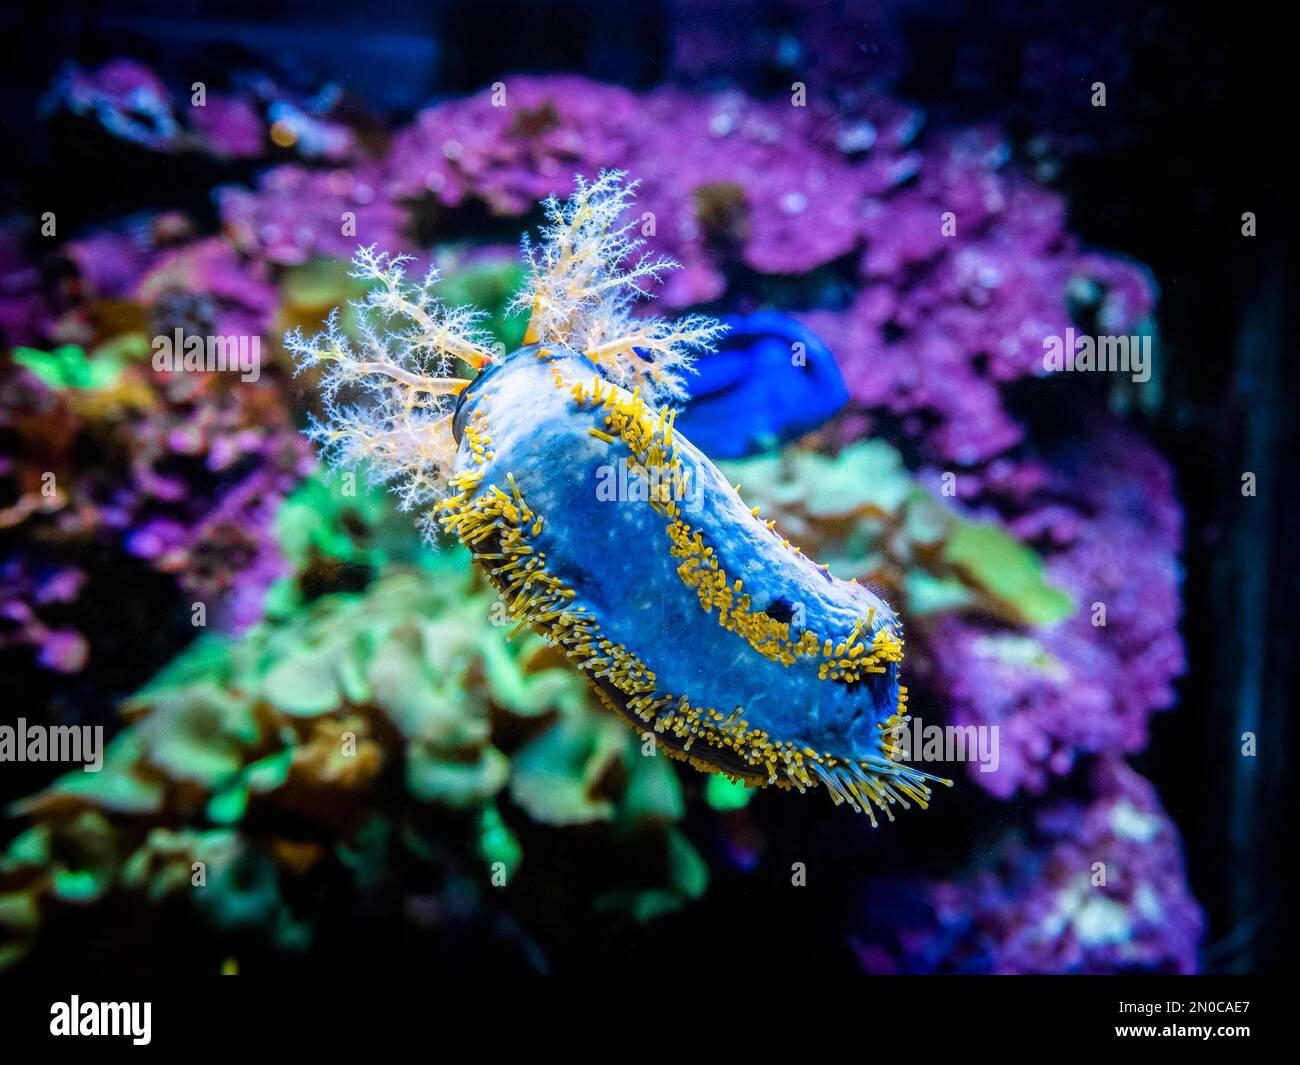 Sea apple (Pseudocolochirus violaceus) eating from the fish tank glass with blurred background Stock Photo